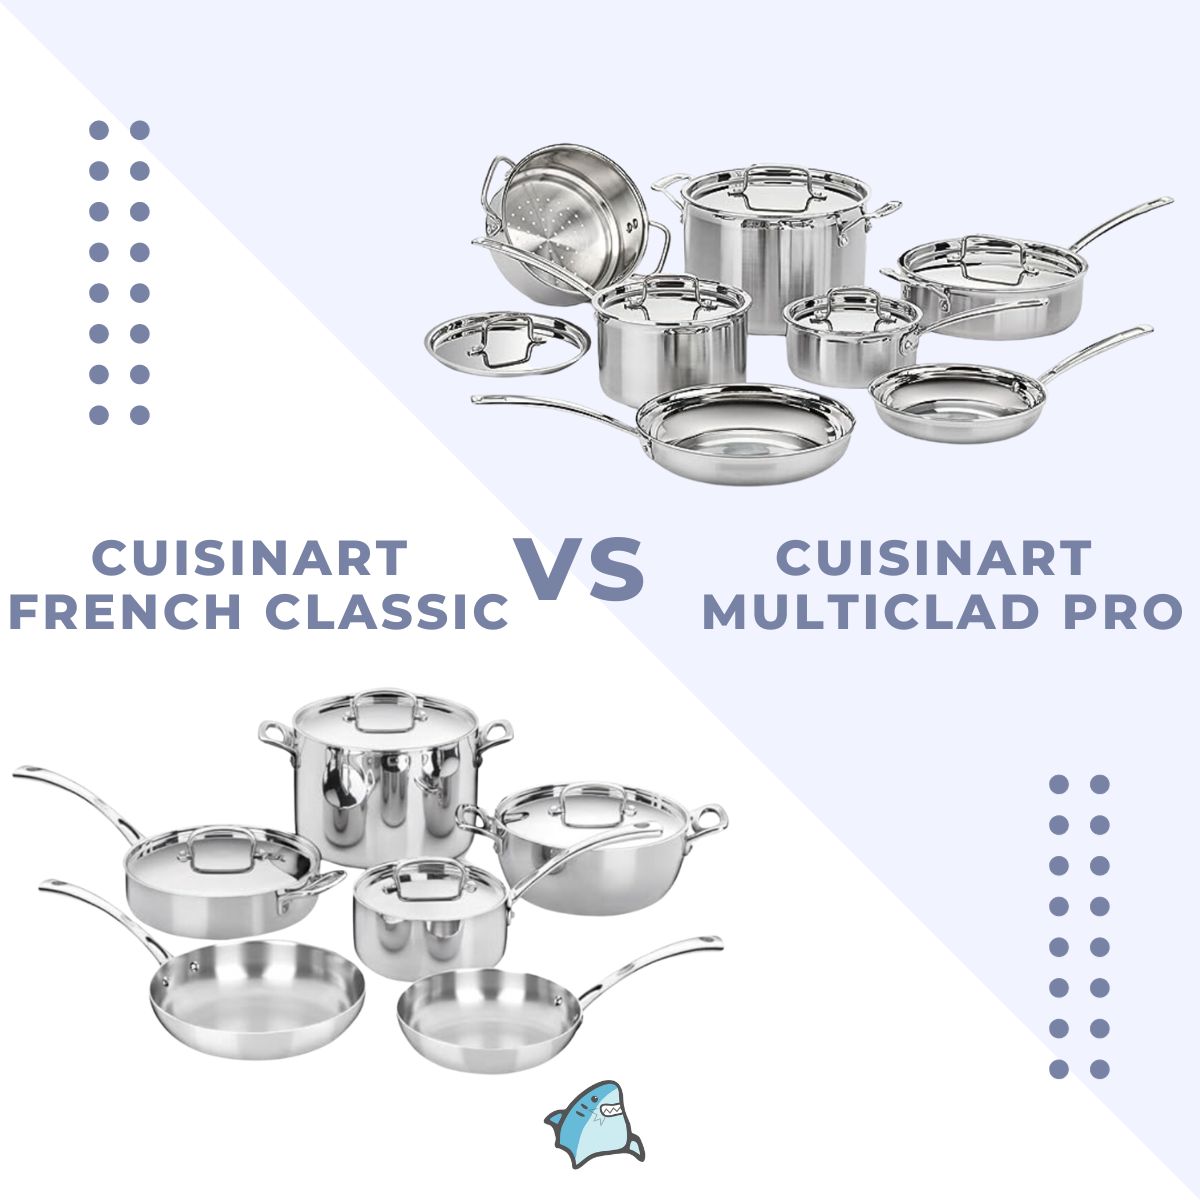 Cuisinart French Classic Vs Multiclad Pro - All Day I Eat